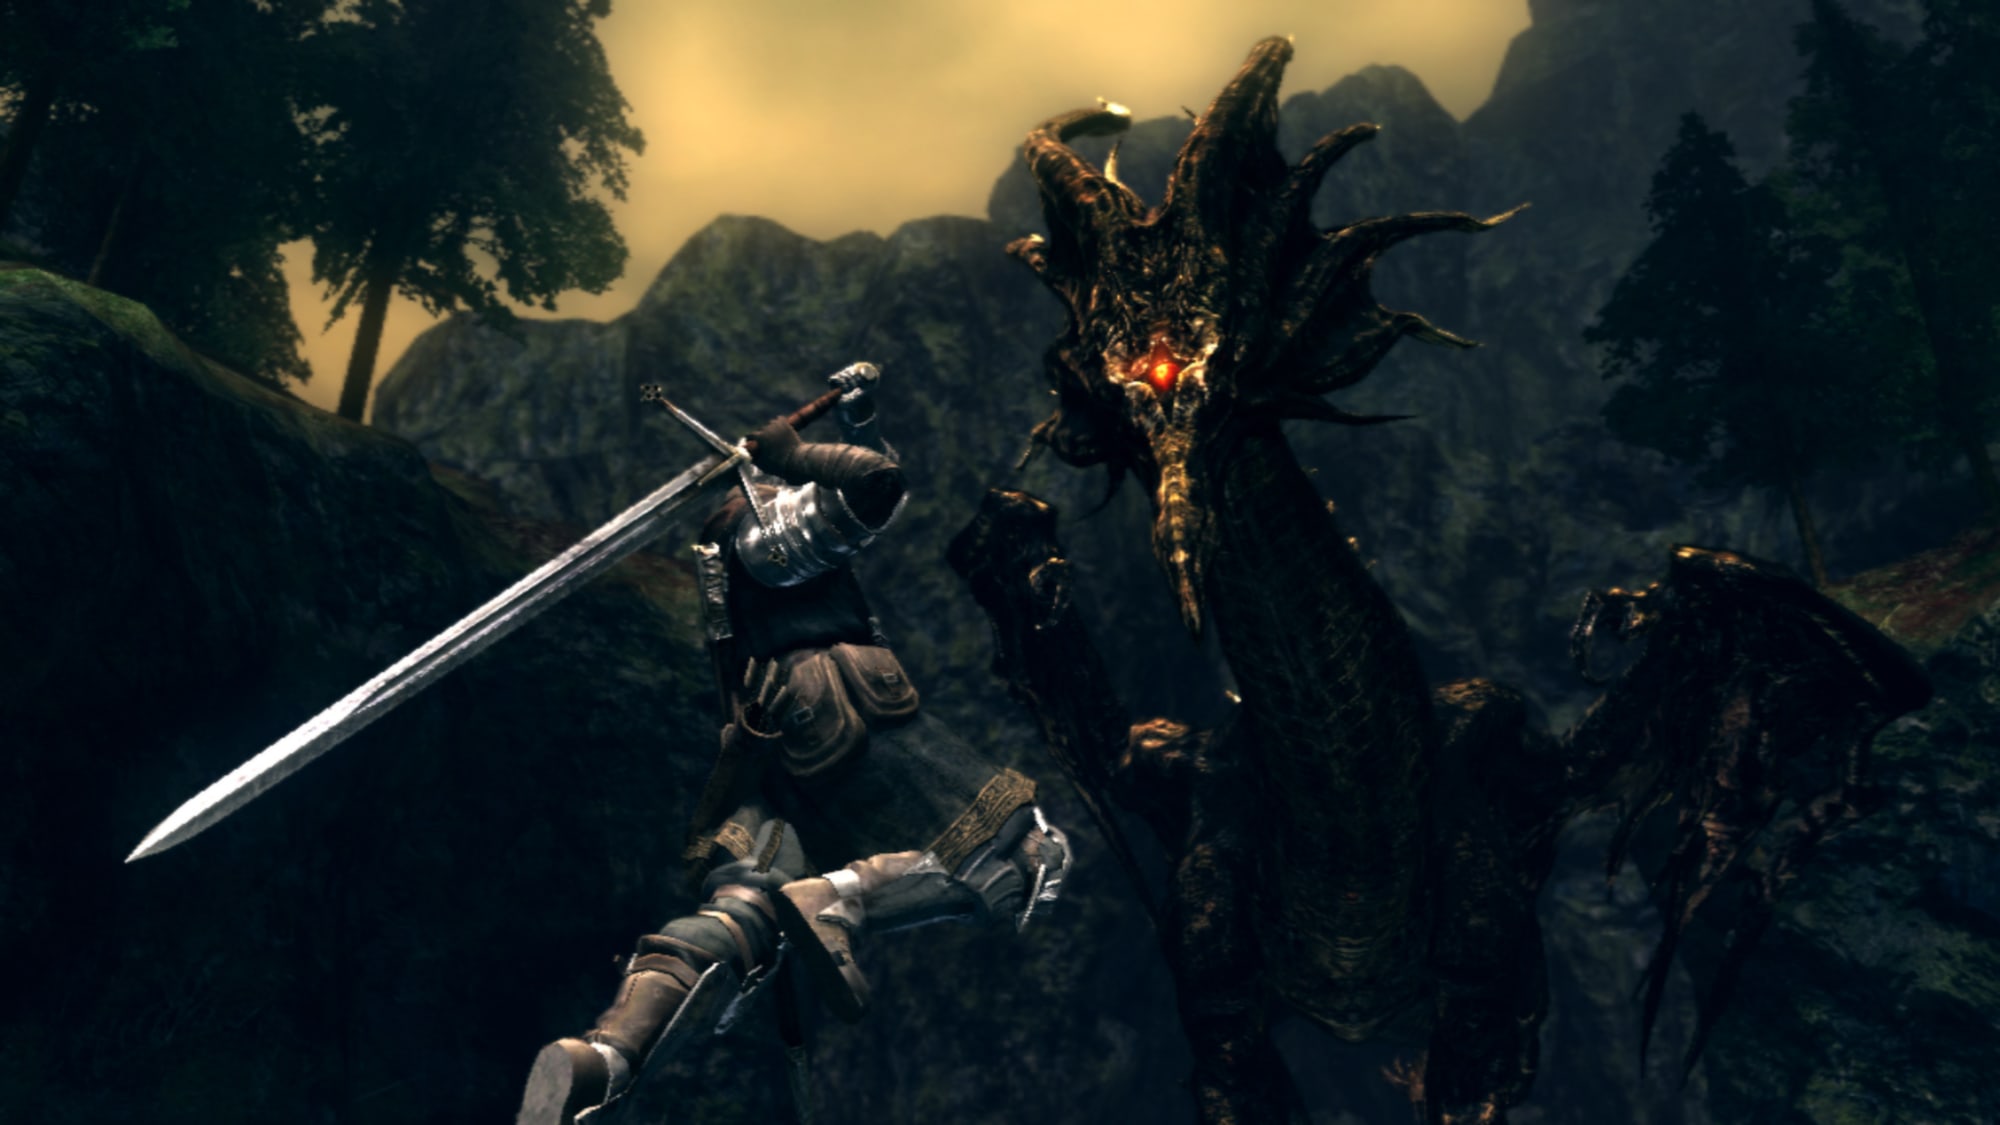 Dark Souls: Remastered review – dark fantasy RPG makes glorious return, Role playing games